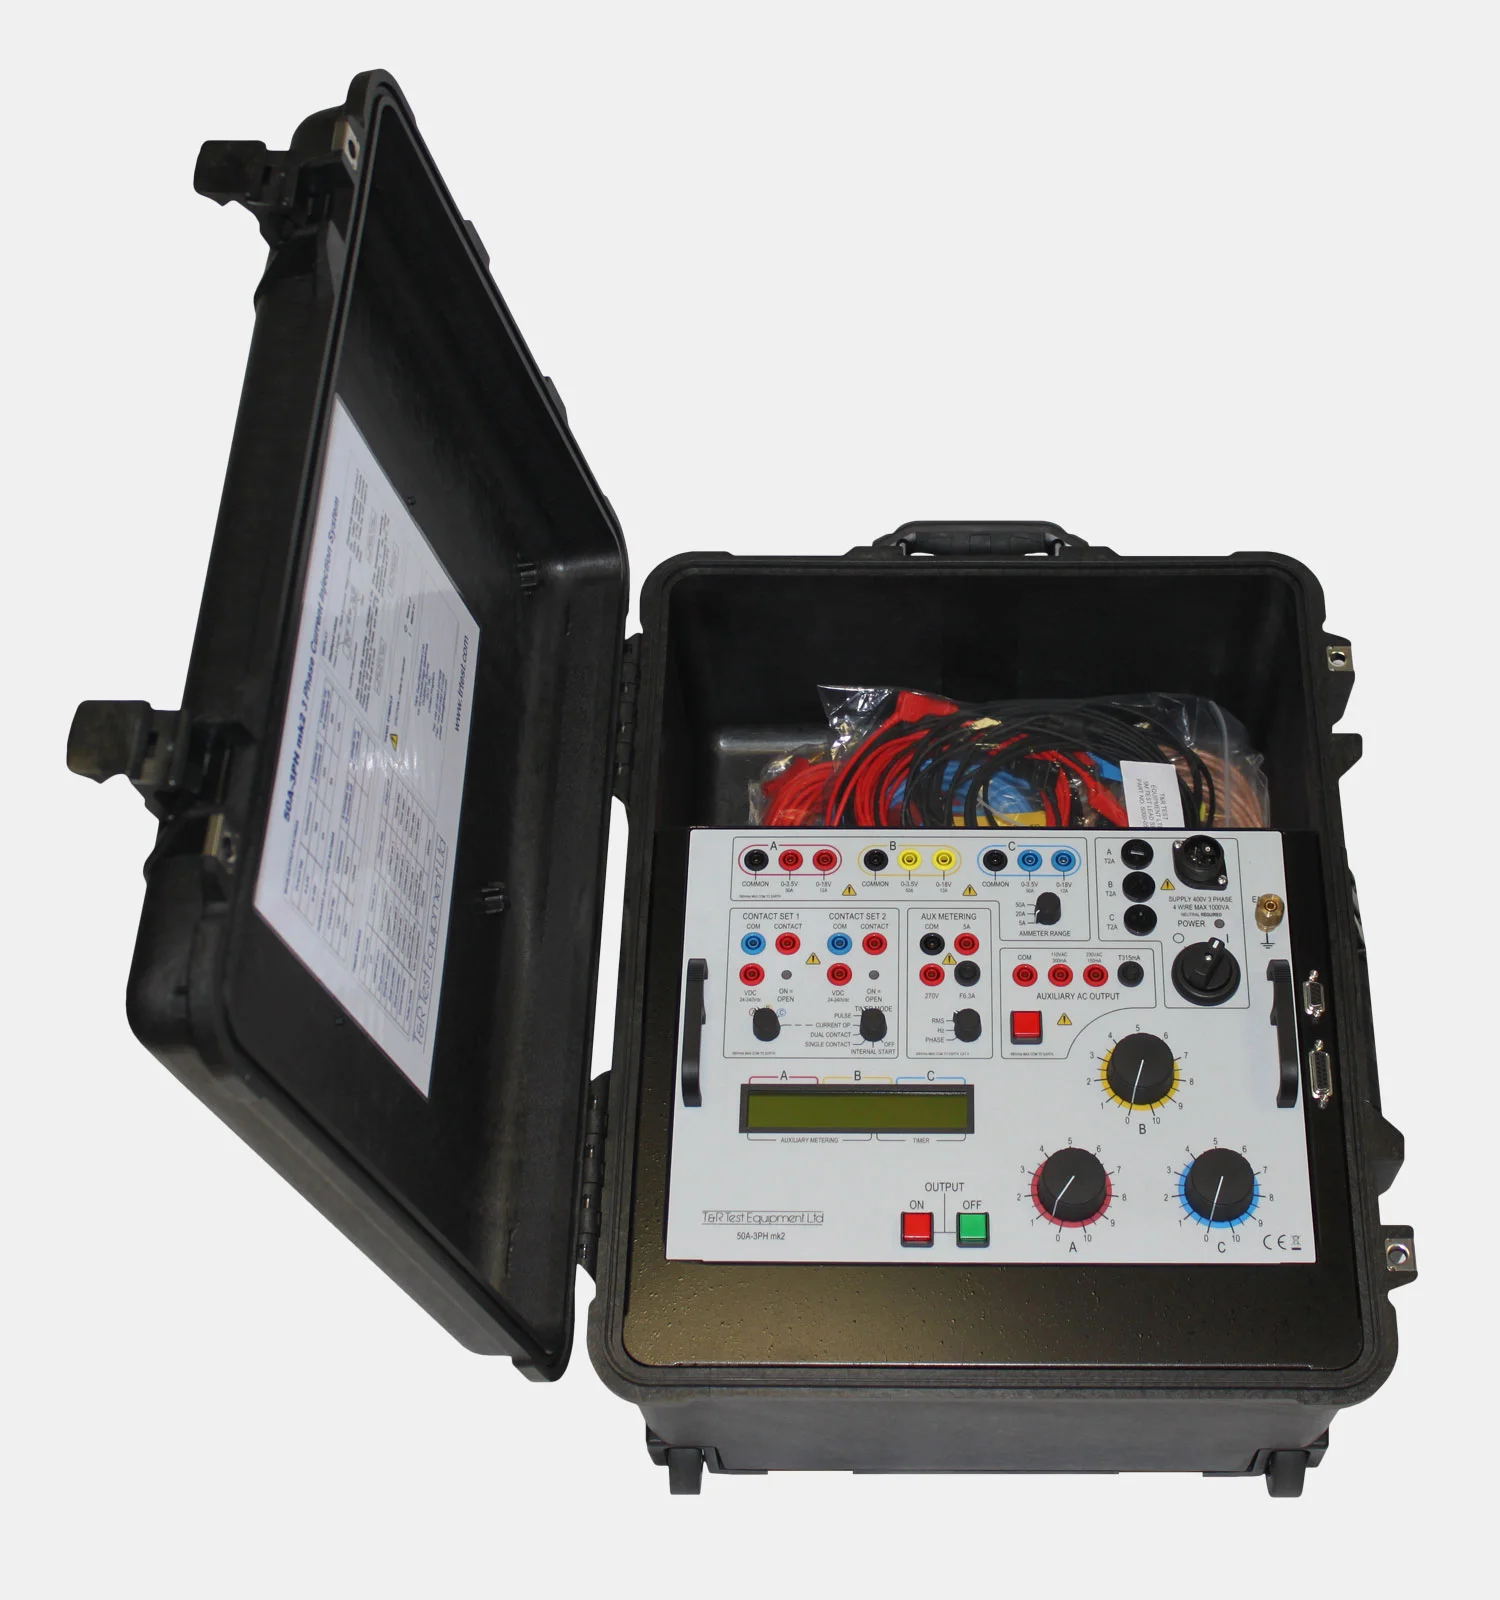 UK Suppliers of 50A-3PH MK2 Secondary Current Injection Test Set